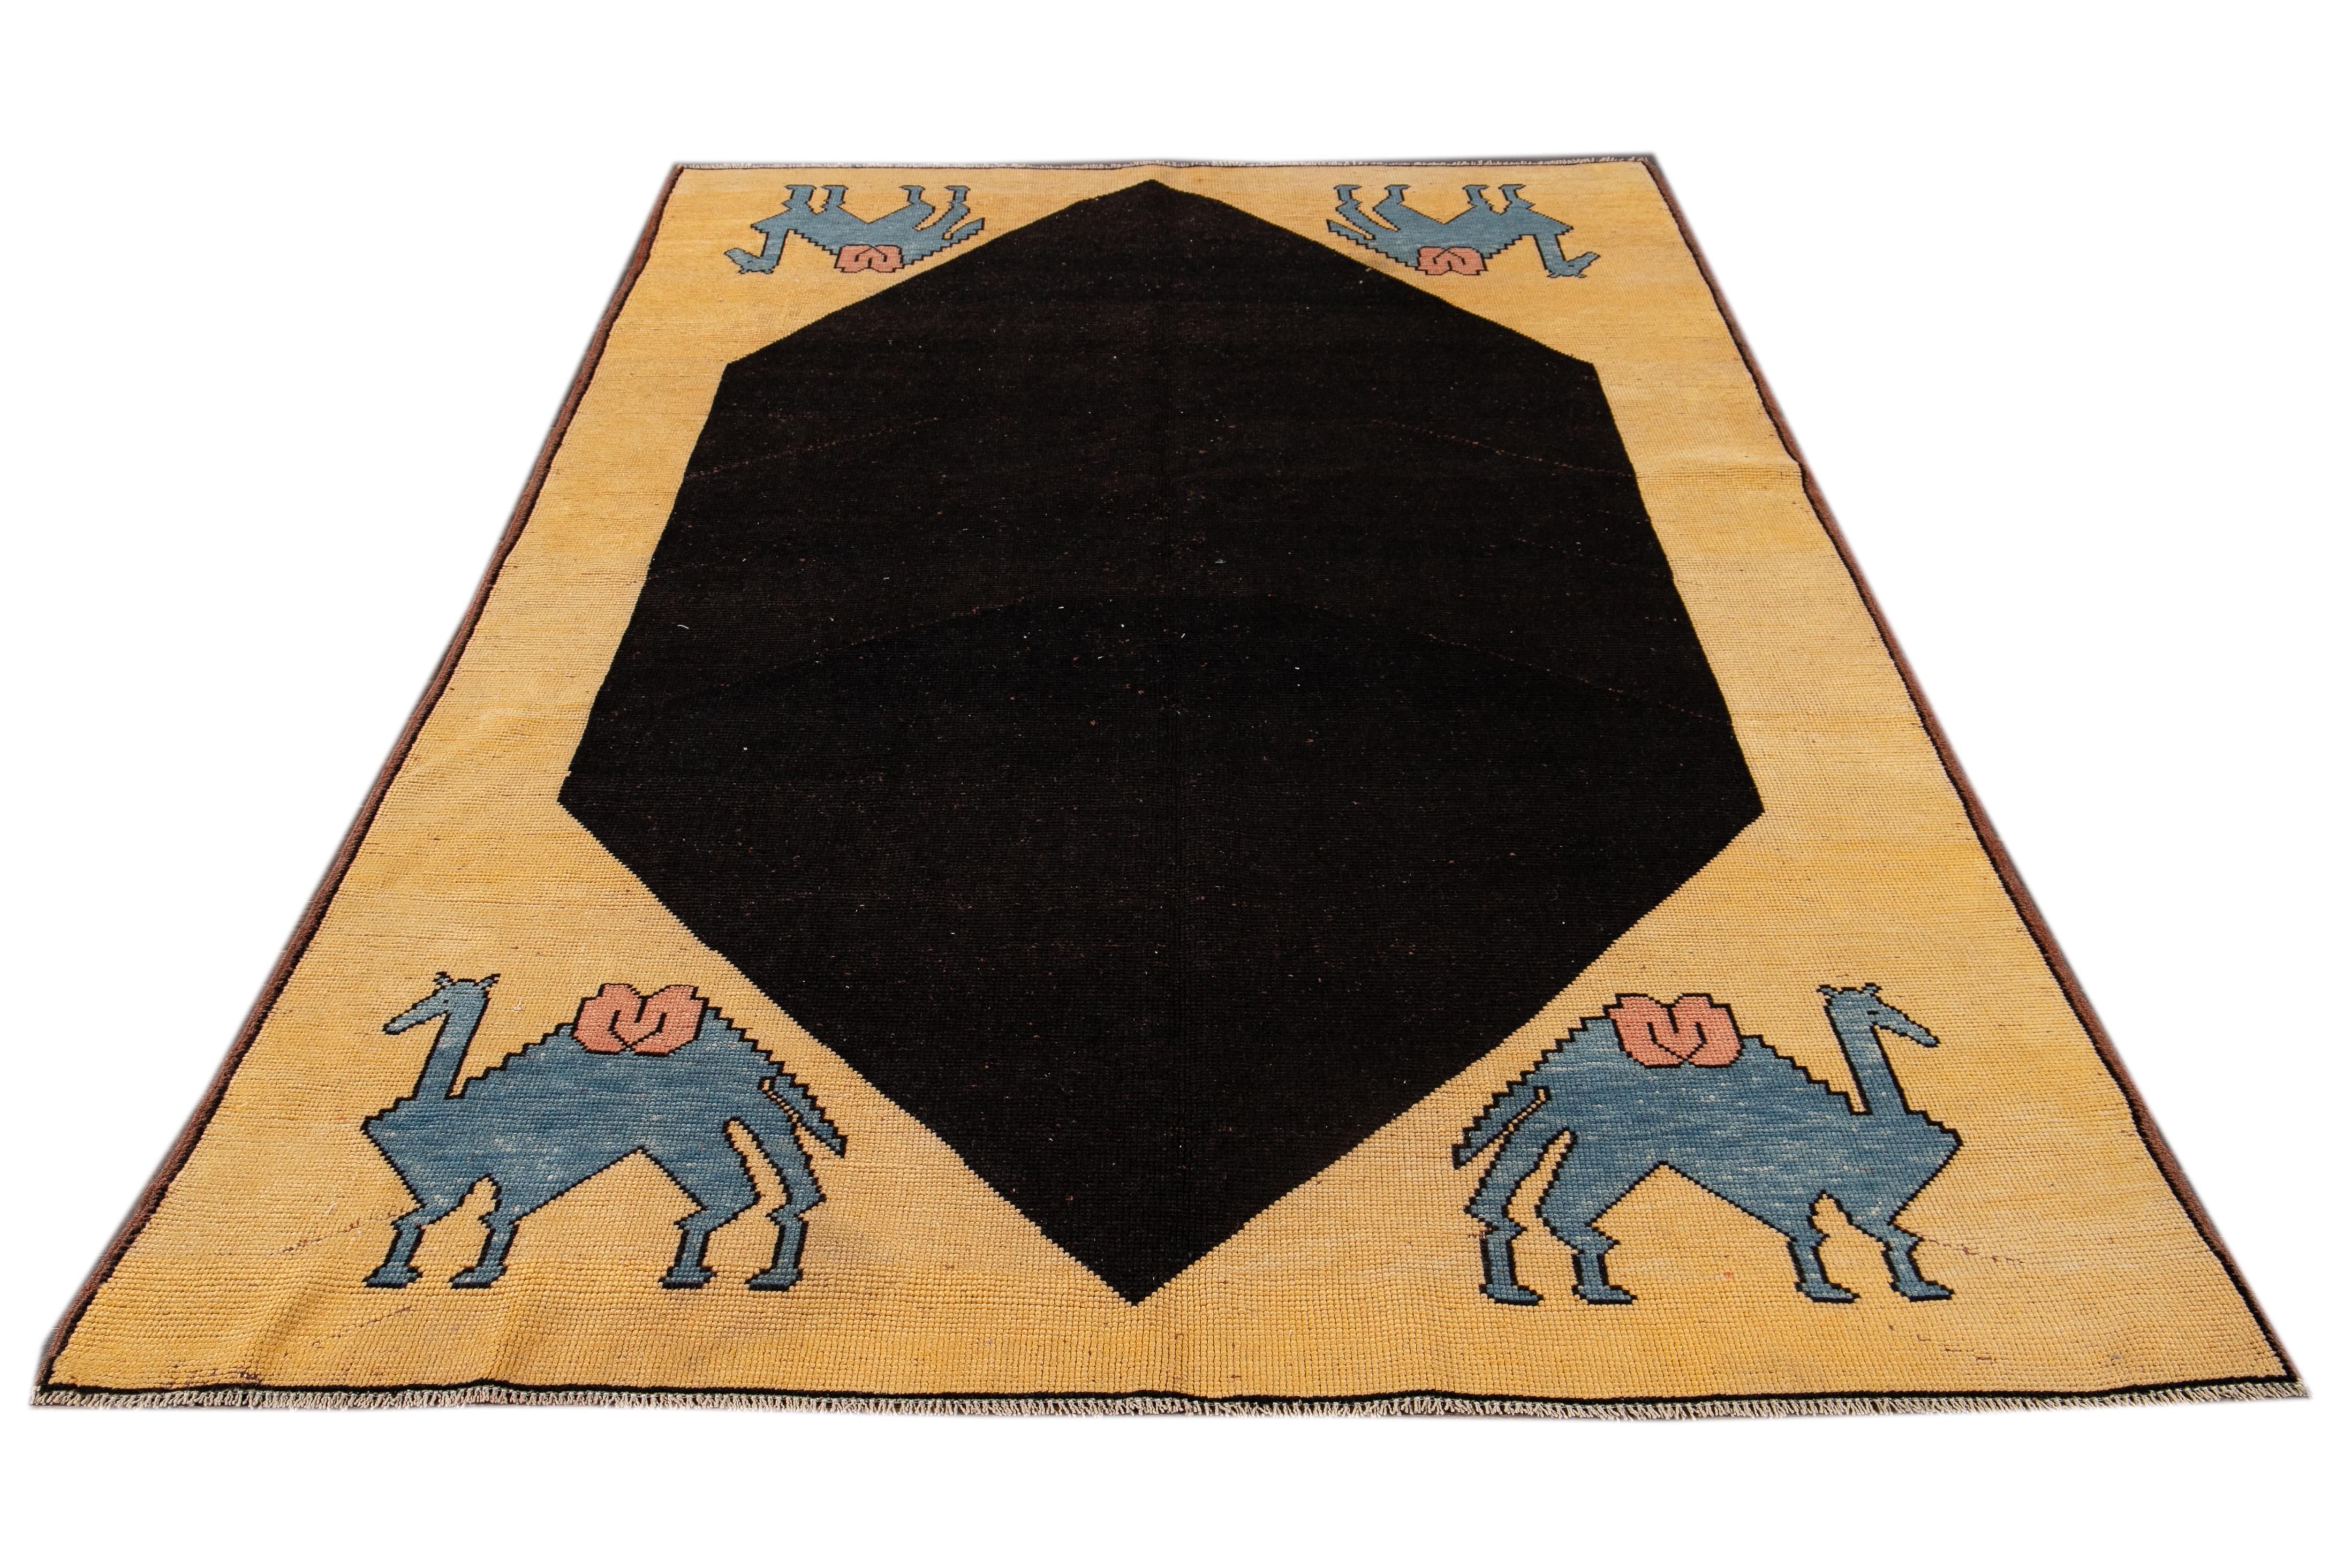 Beautiful vintage Turkish Art Deco rug, hand-knotted wool with a yellow field and black and blue accents in a gorgeous all-over geometric design,

This rug measures 6